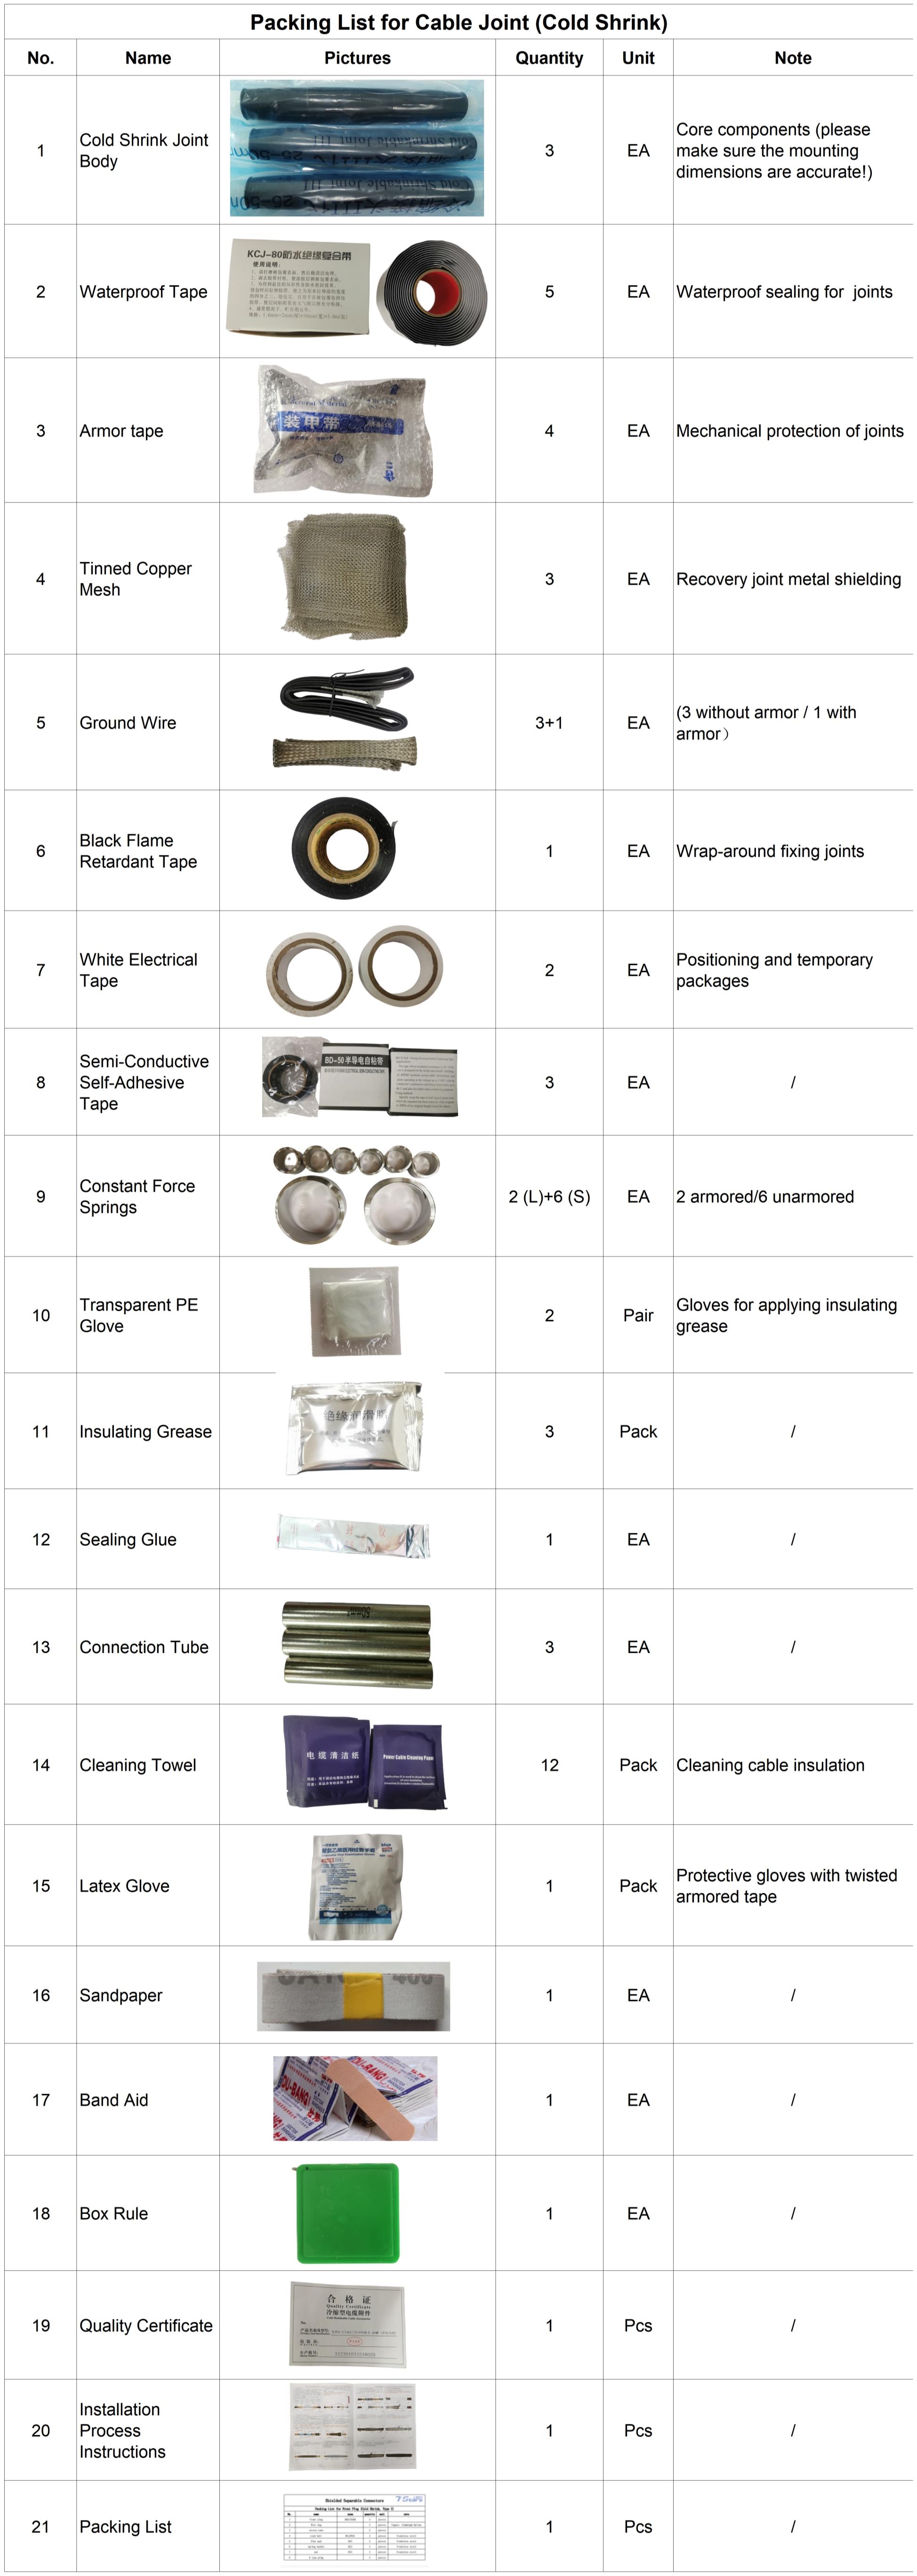 15kV Cable Joint packing list